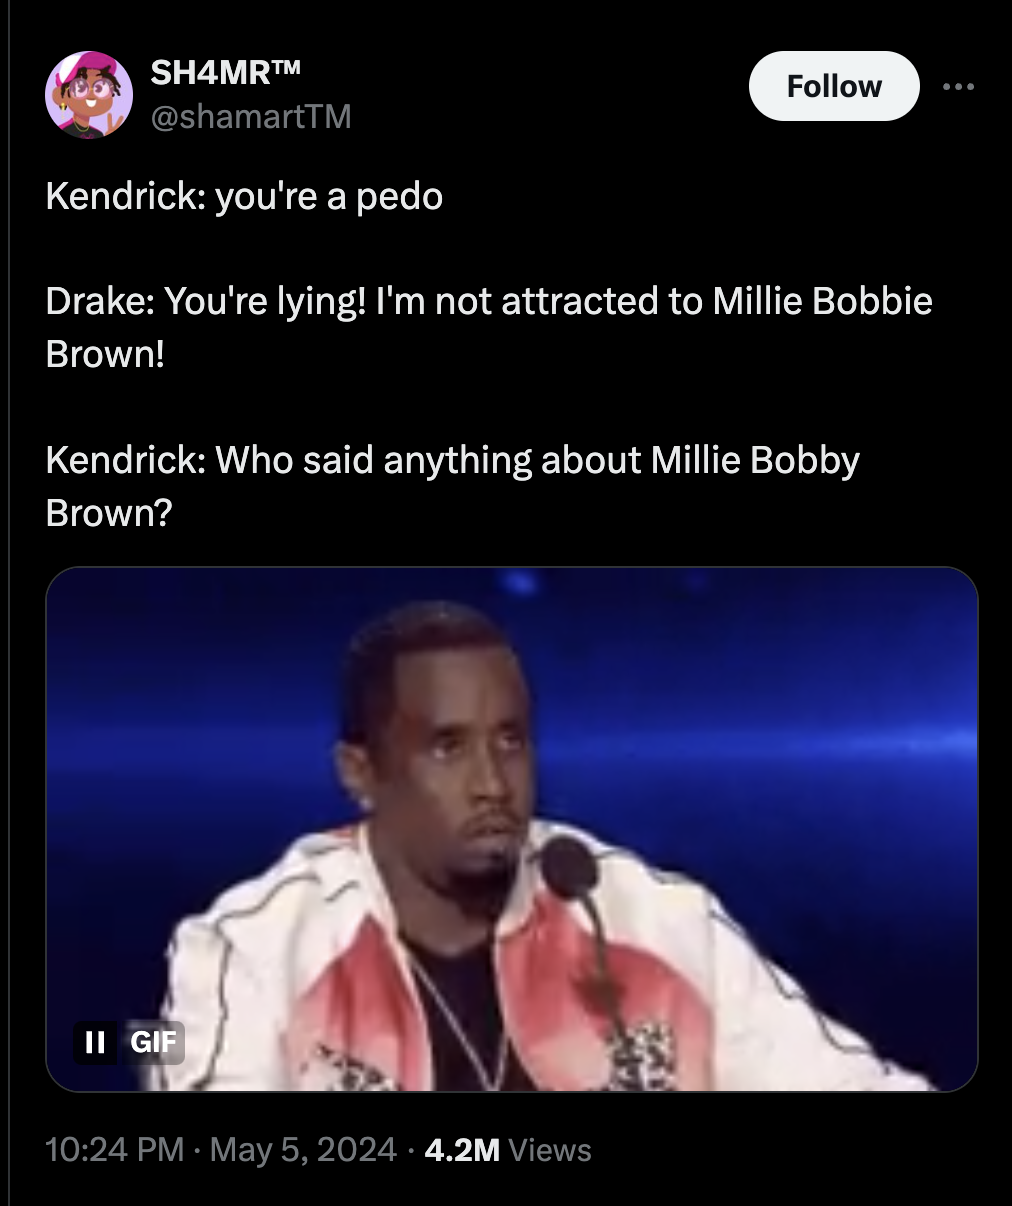 screenshot - SH4MRTM Kendrick you're a pedo Drake You're lying! I'm not attracted to Millie Bobbie Brown! Kendrick Who said anything about Millie Bobby Brown? Ii Gif 4.2M Views